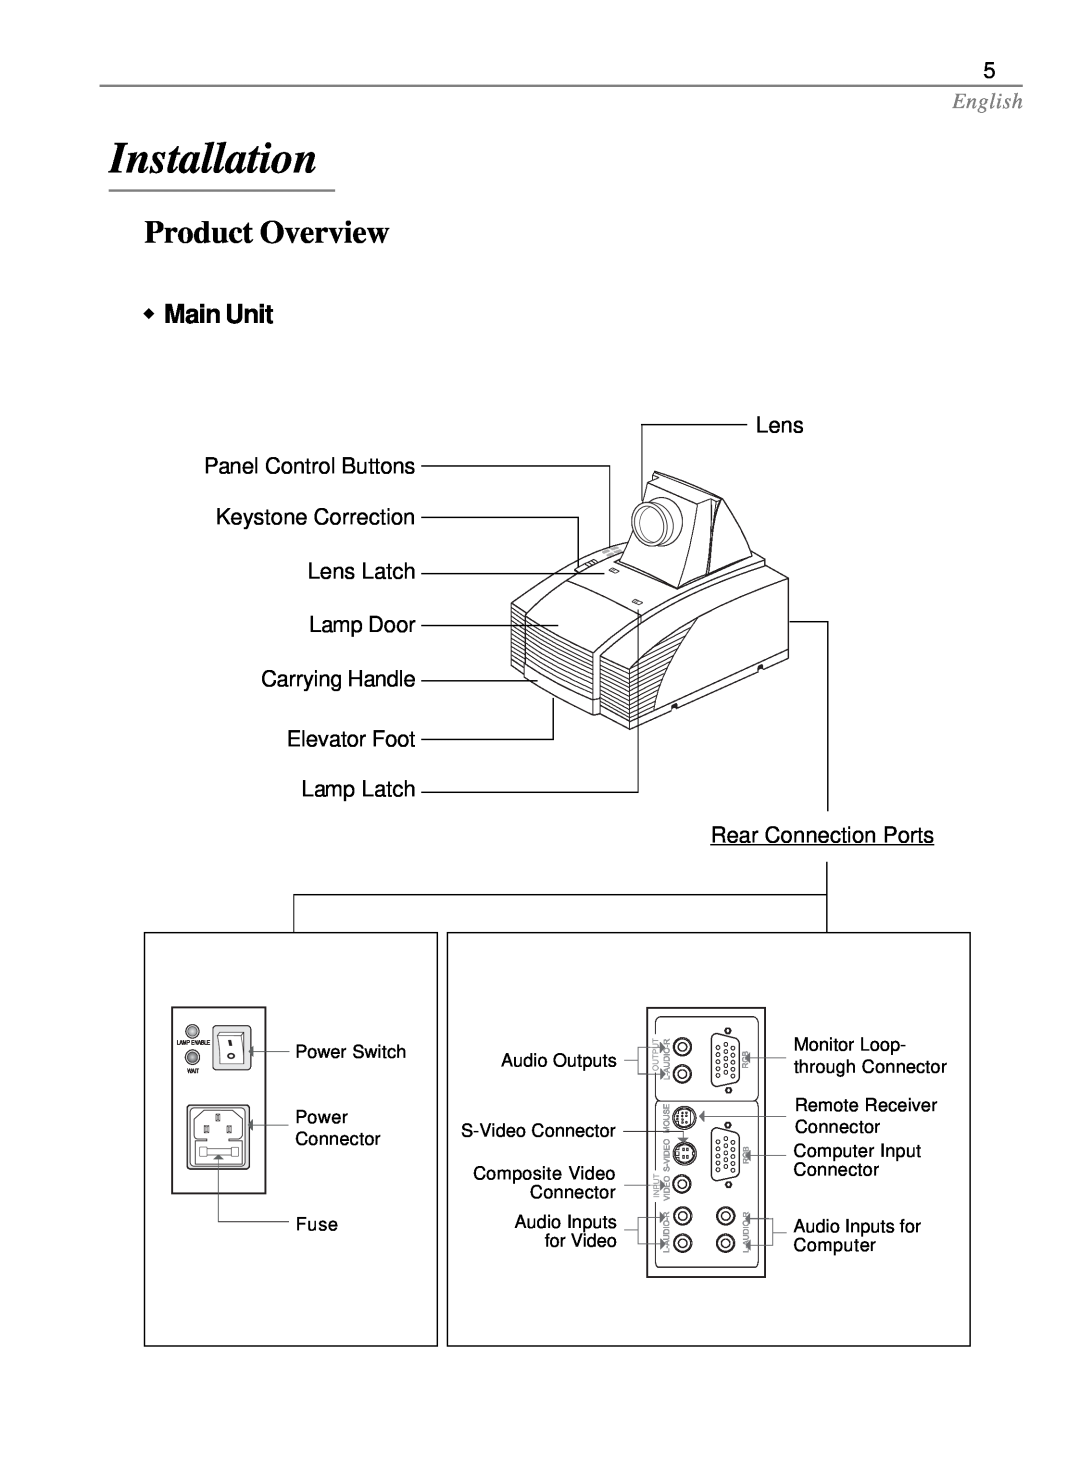 Optoma Technology EP585 specifications Installation, Product Overview, w Main Unit, English 